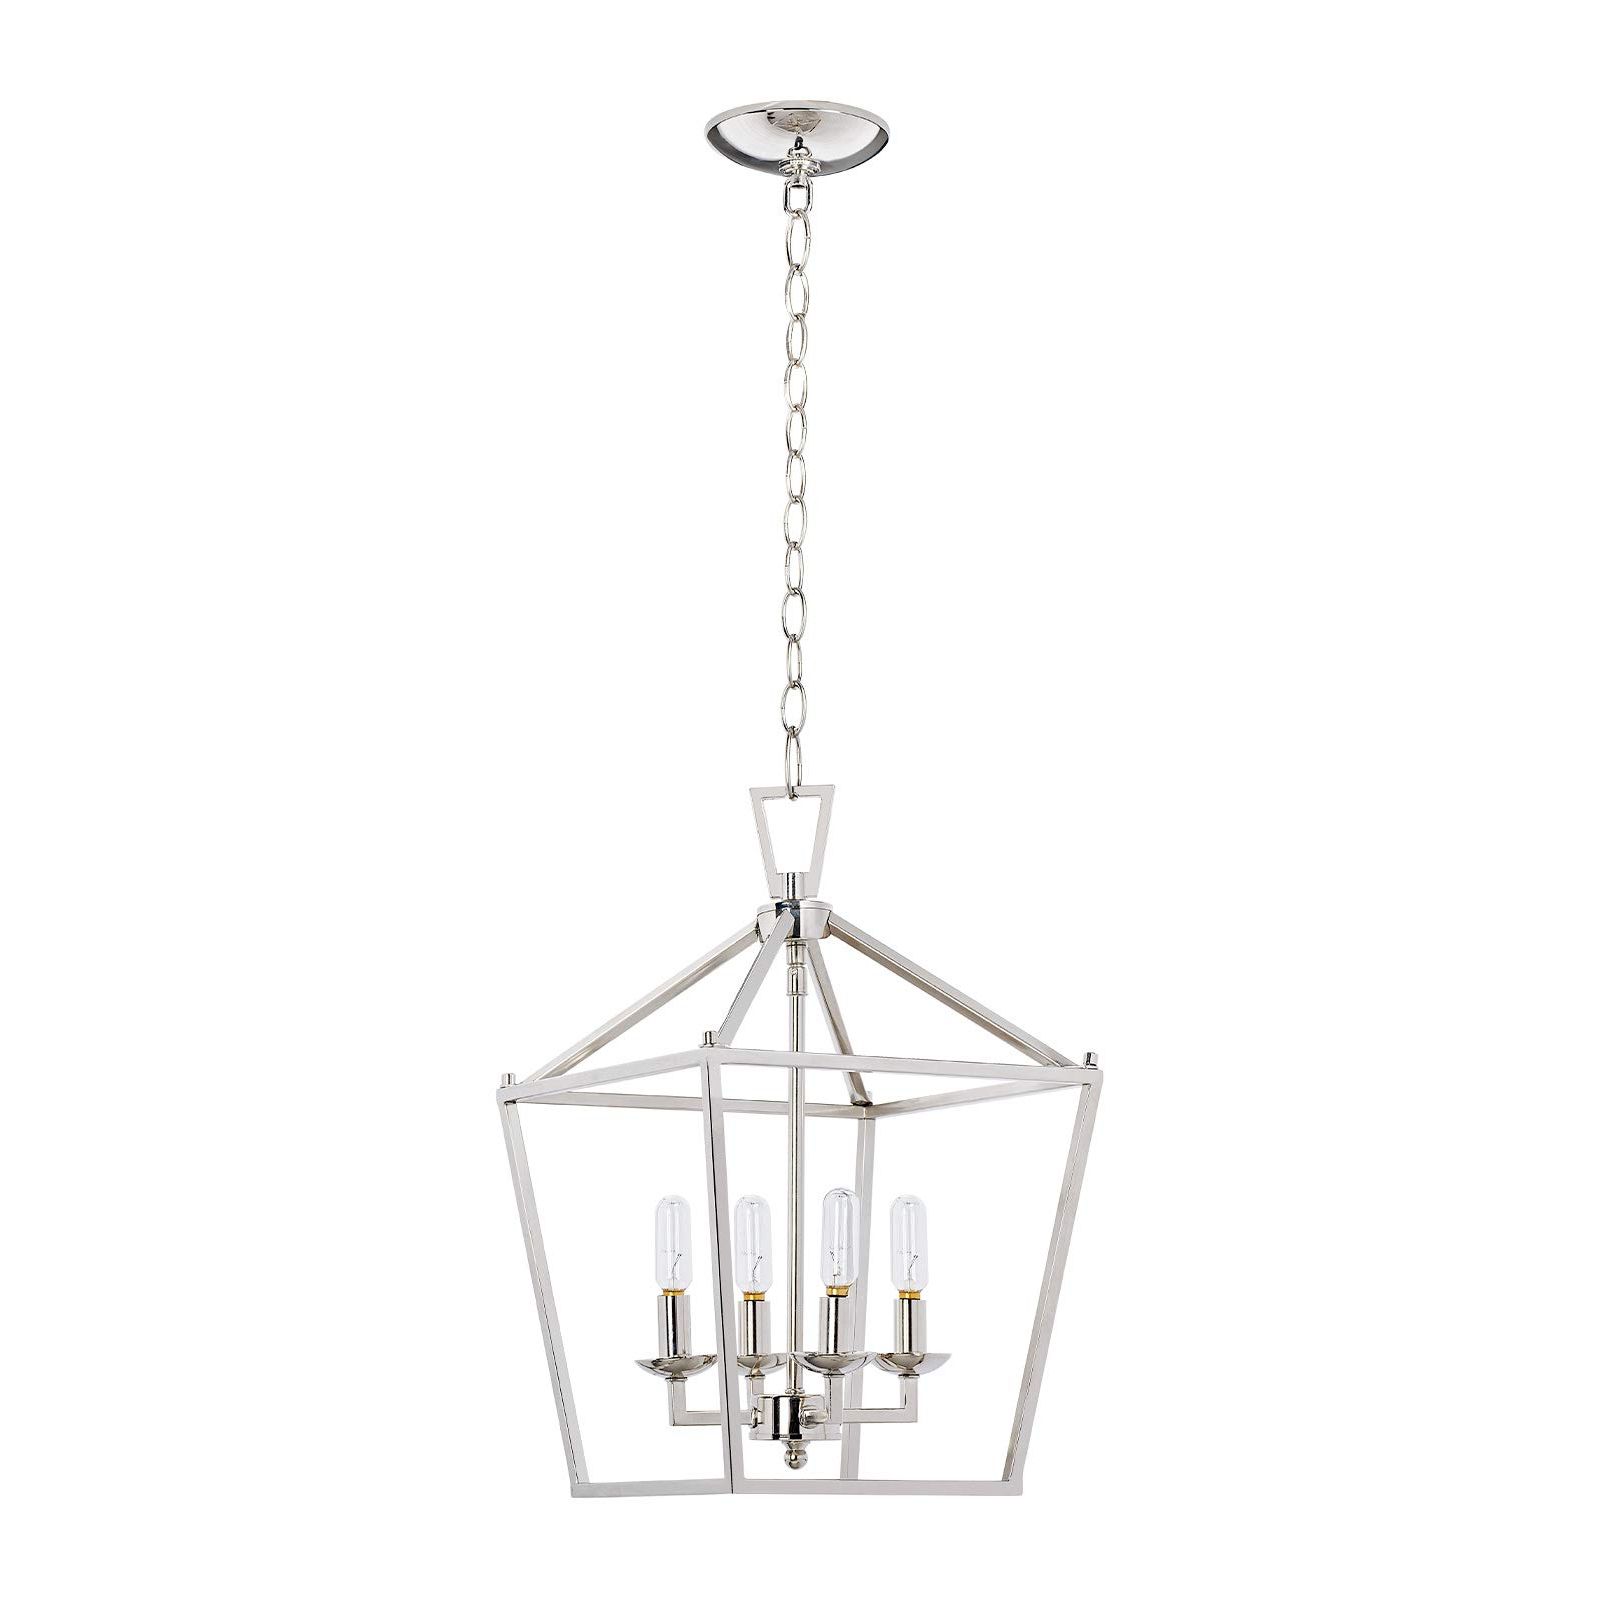 Preferred Motini 4 Light Silver Lantern Pendant Light Polished Nickel Finish Hanging  Light Fixture Geometric Chandelier With Adjustable Chain Metal Cage Pendant  Lighting For Kitchen Island Dining Room Foyer – – Amazon Intended For Deco Polished Nickel Lantern Chandeliers (View 9 of 10)